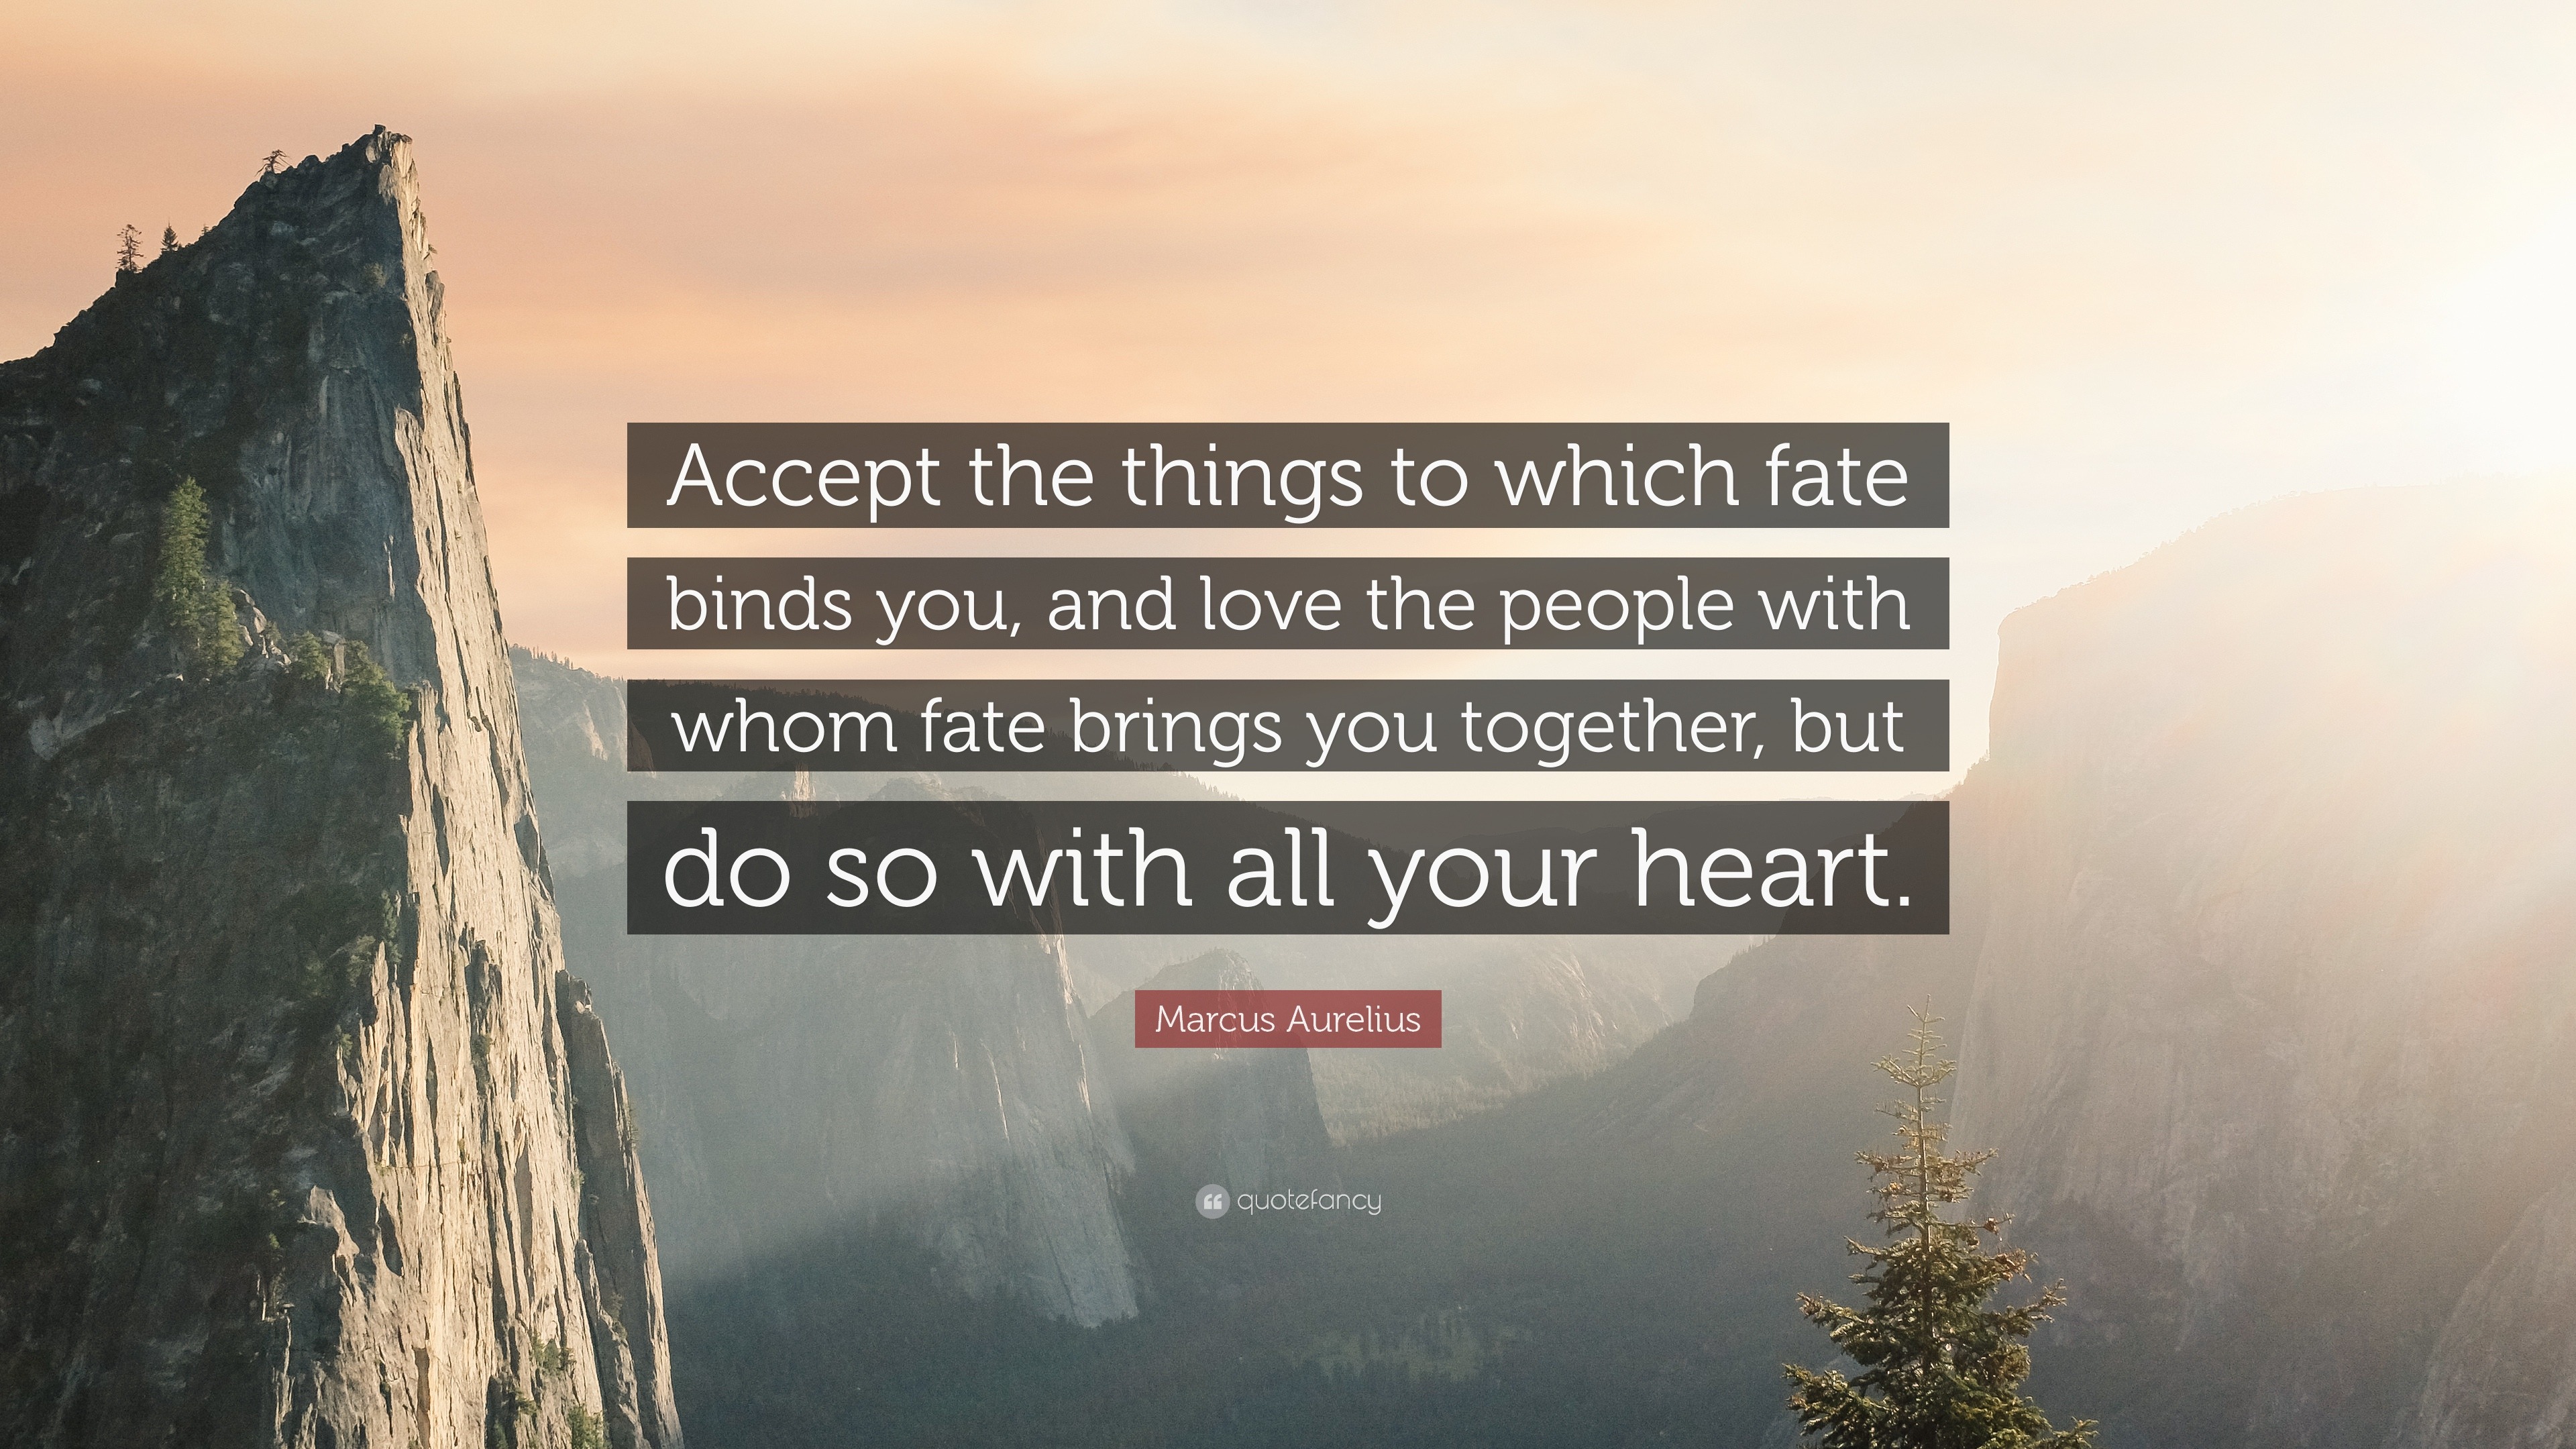 Marcus Aurelius Quote “Accept the things to which fate binds you and love